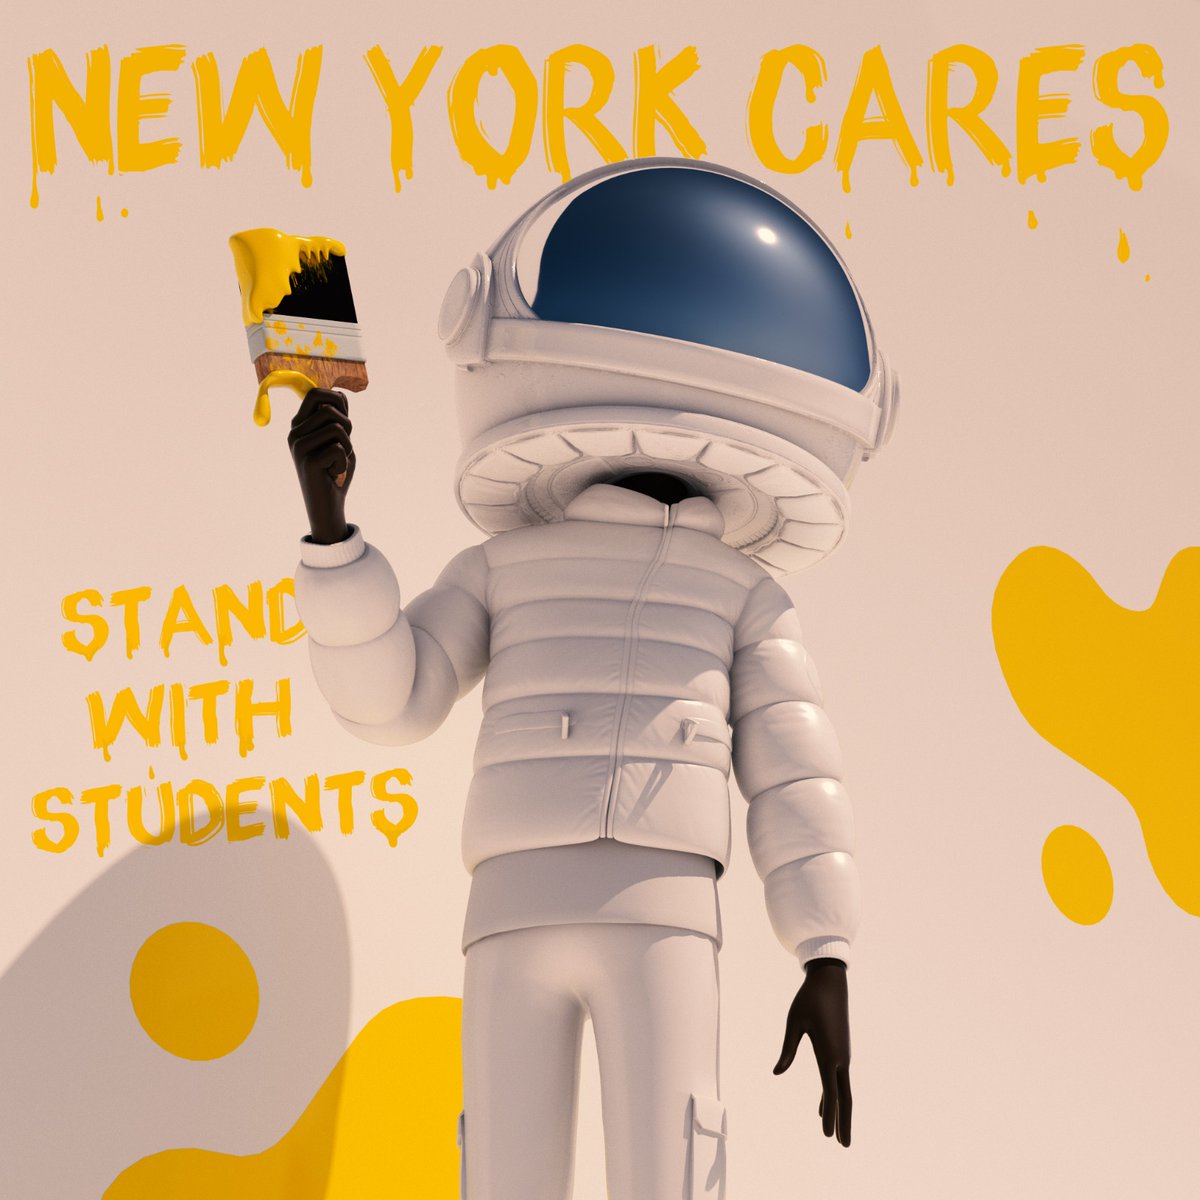 The @Micah_Johnson3 @AkuDreams airdrop for @newyorkcares 'Stand with Students' was just deployed! Total Edition Size: 83 Royalties from secondary sales will go to support 'Stand with Students.' (I have 4 extra in case there are any issues.) opensea.io/assets/ethereu… TY! 🙏❤️